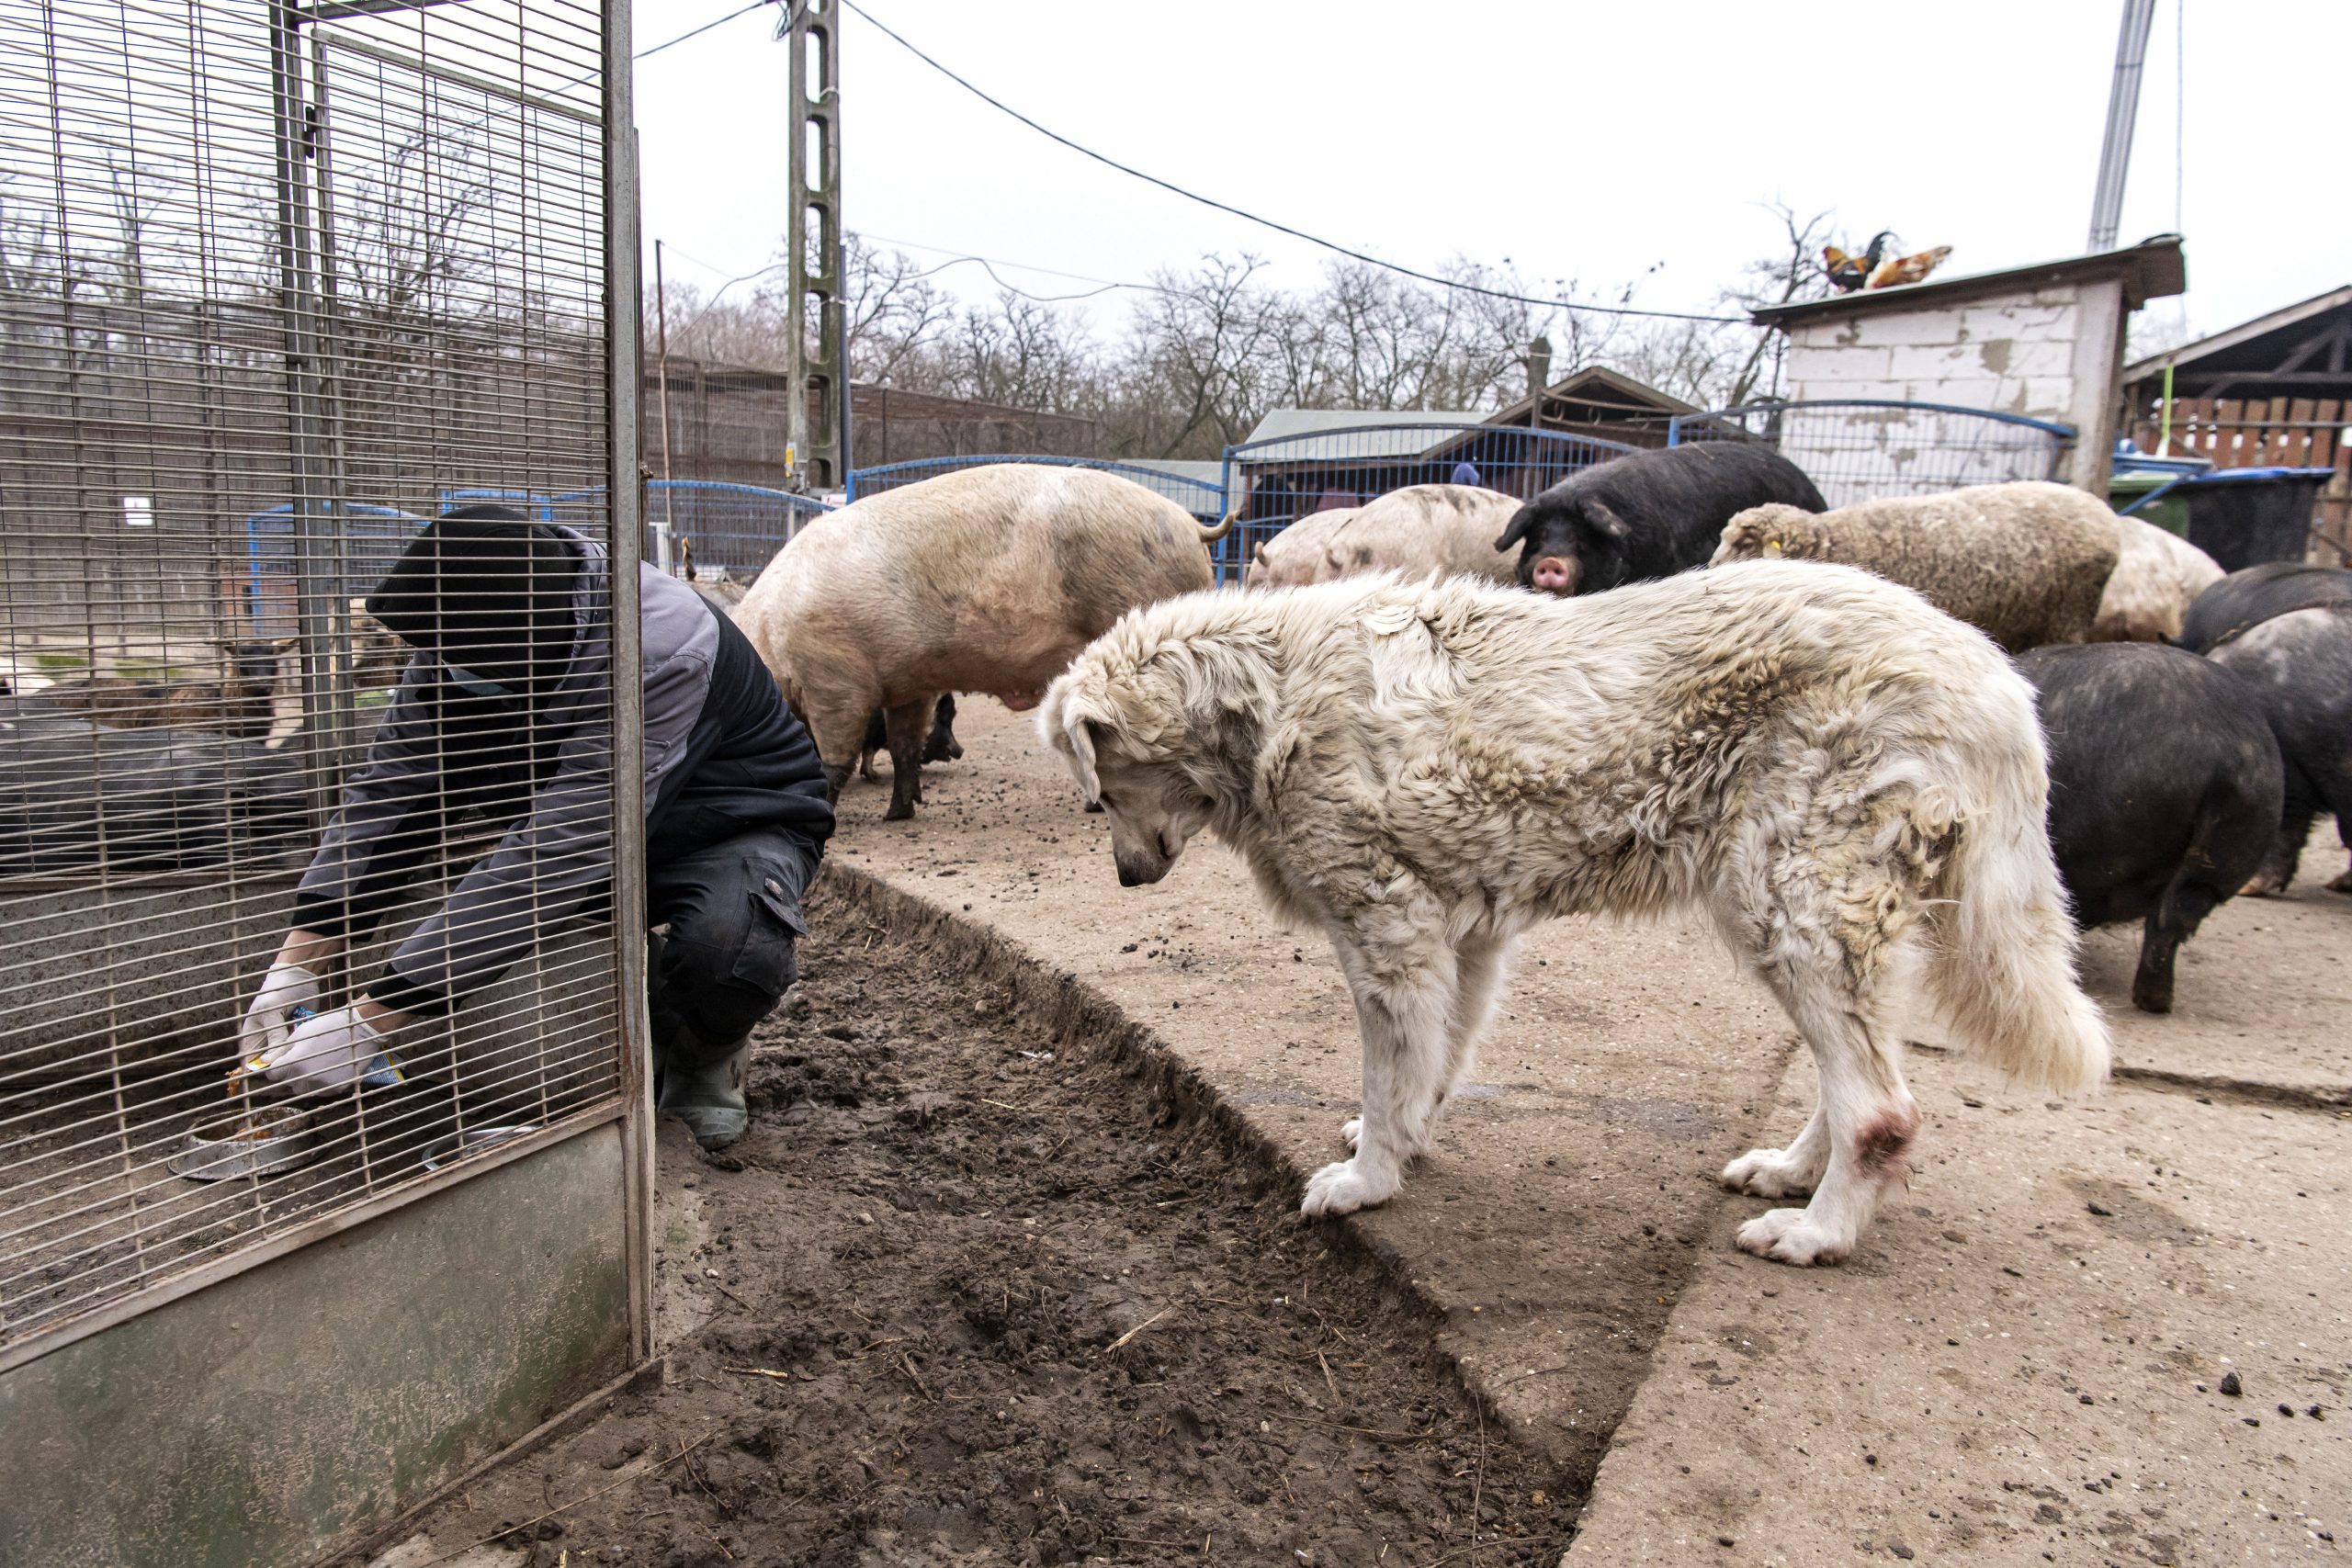 Hungary introduces new animal protection law